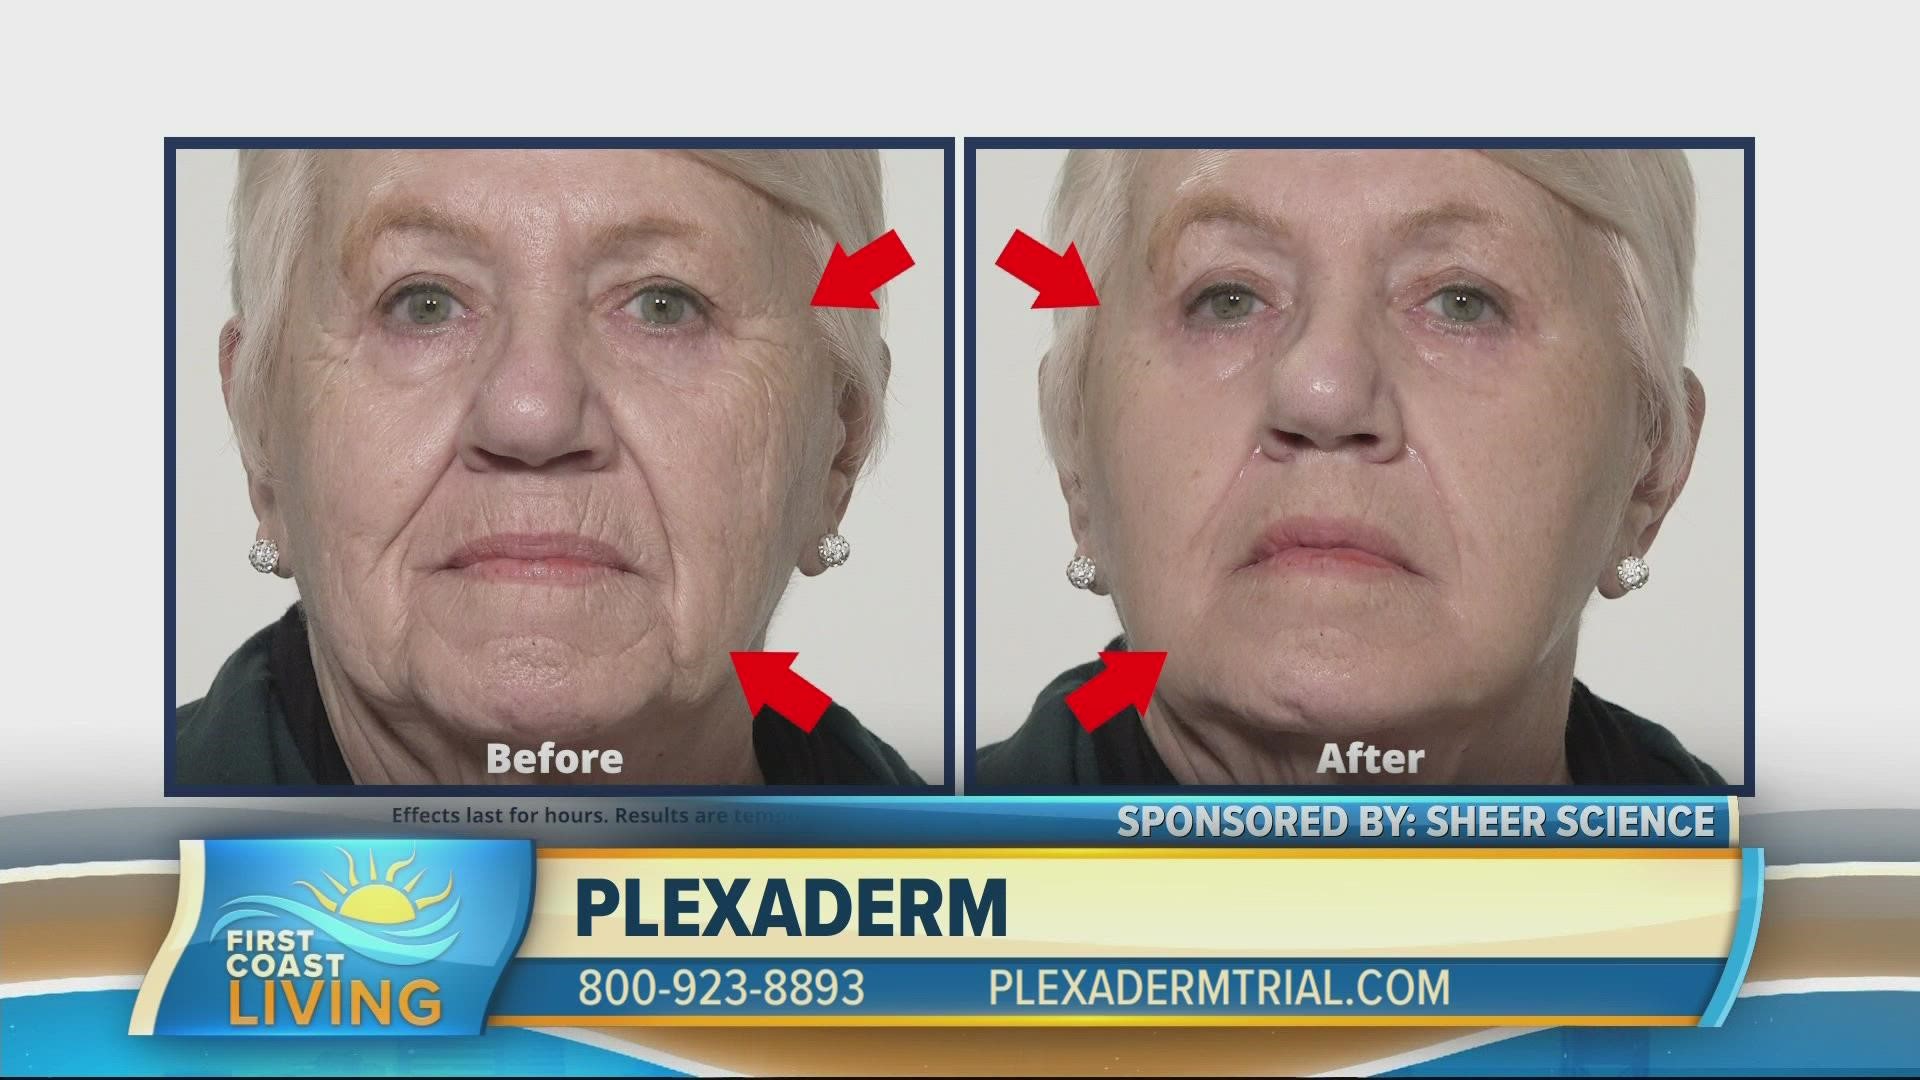 Plexaderm has the power to make you look younger all day long.